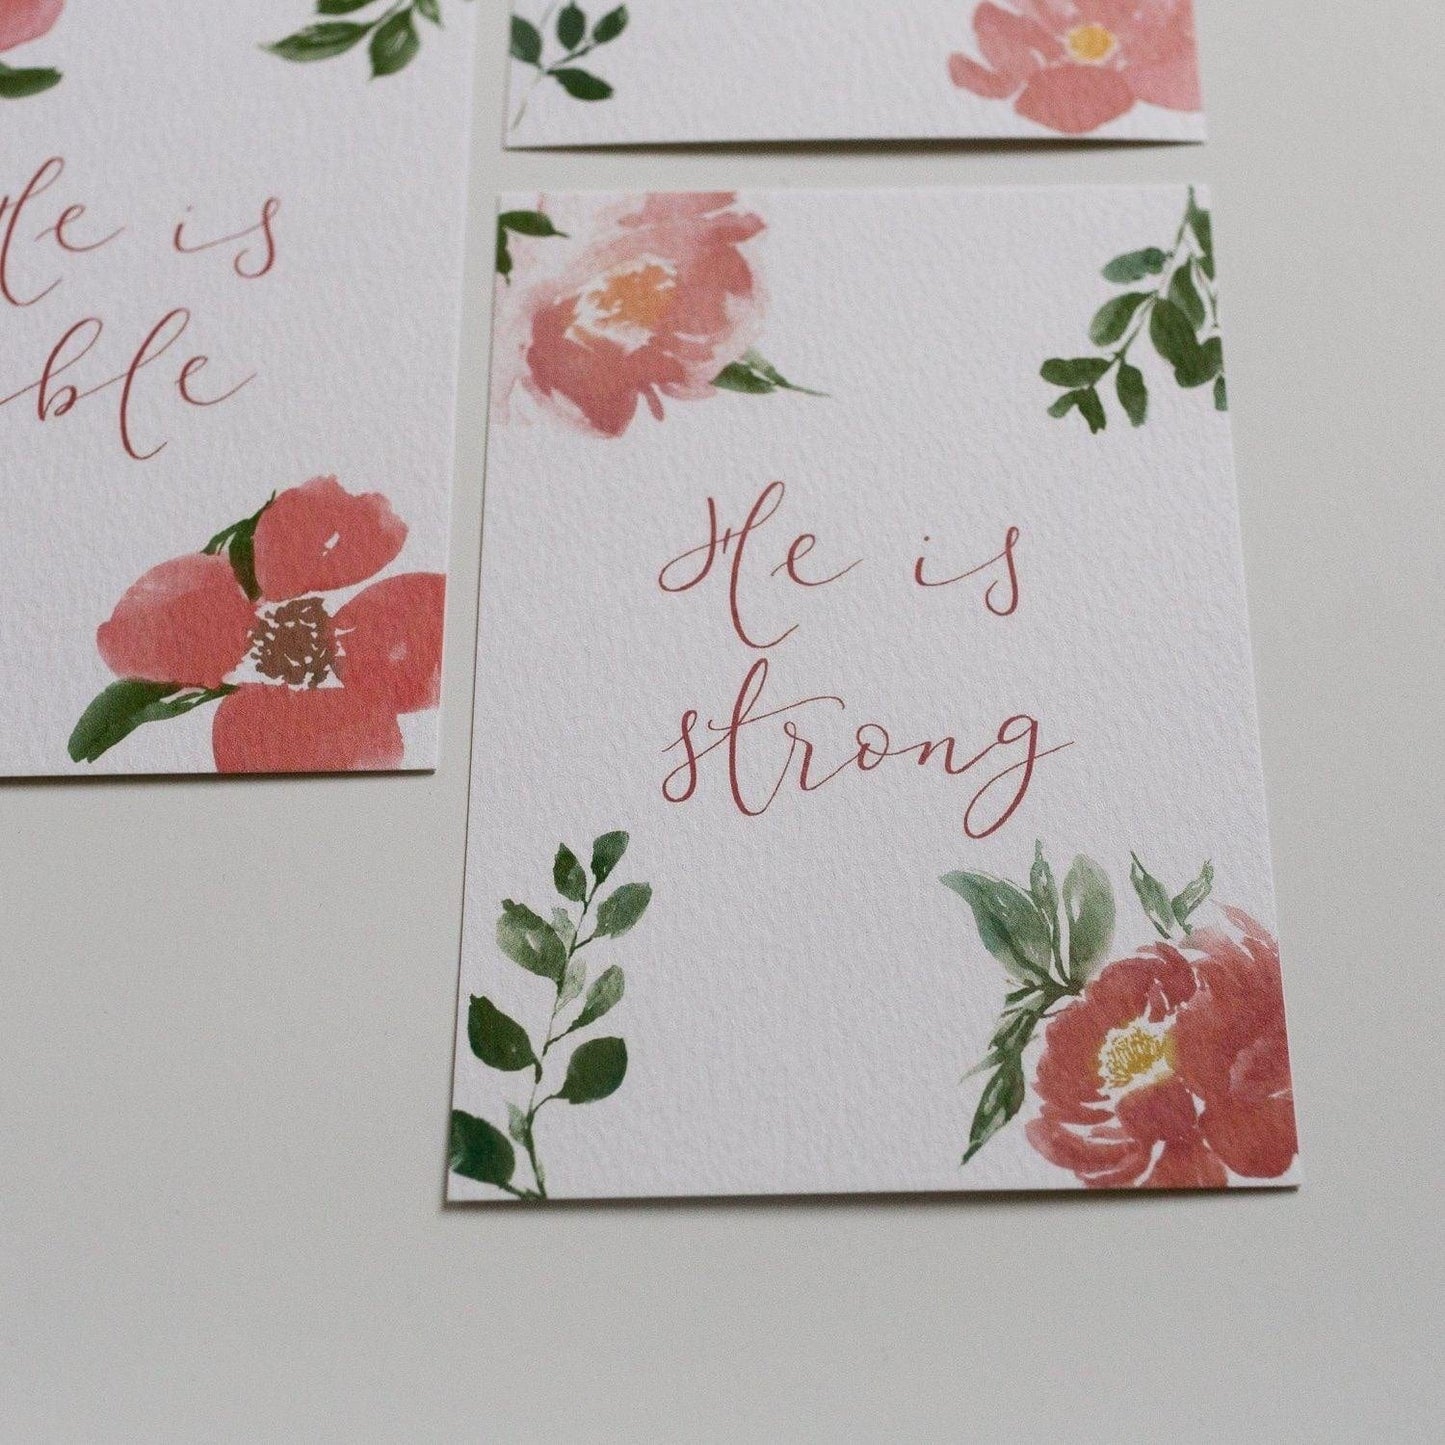 He is strong - postcard with an attribute of God